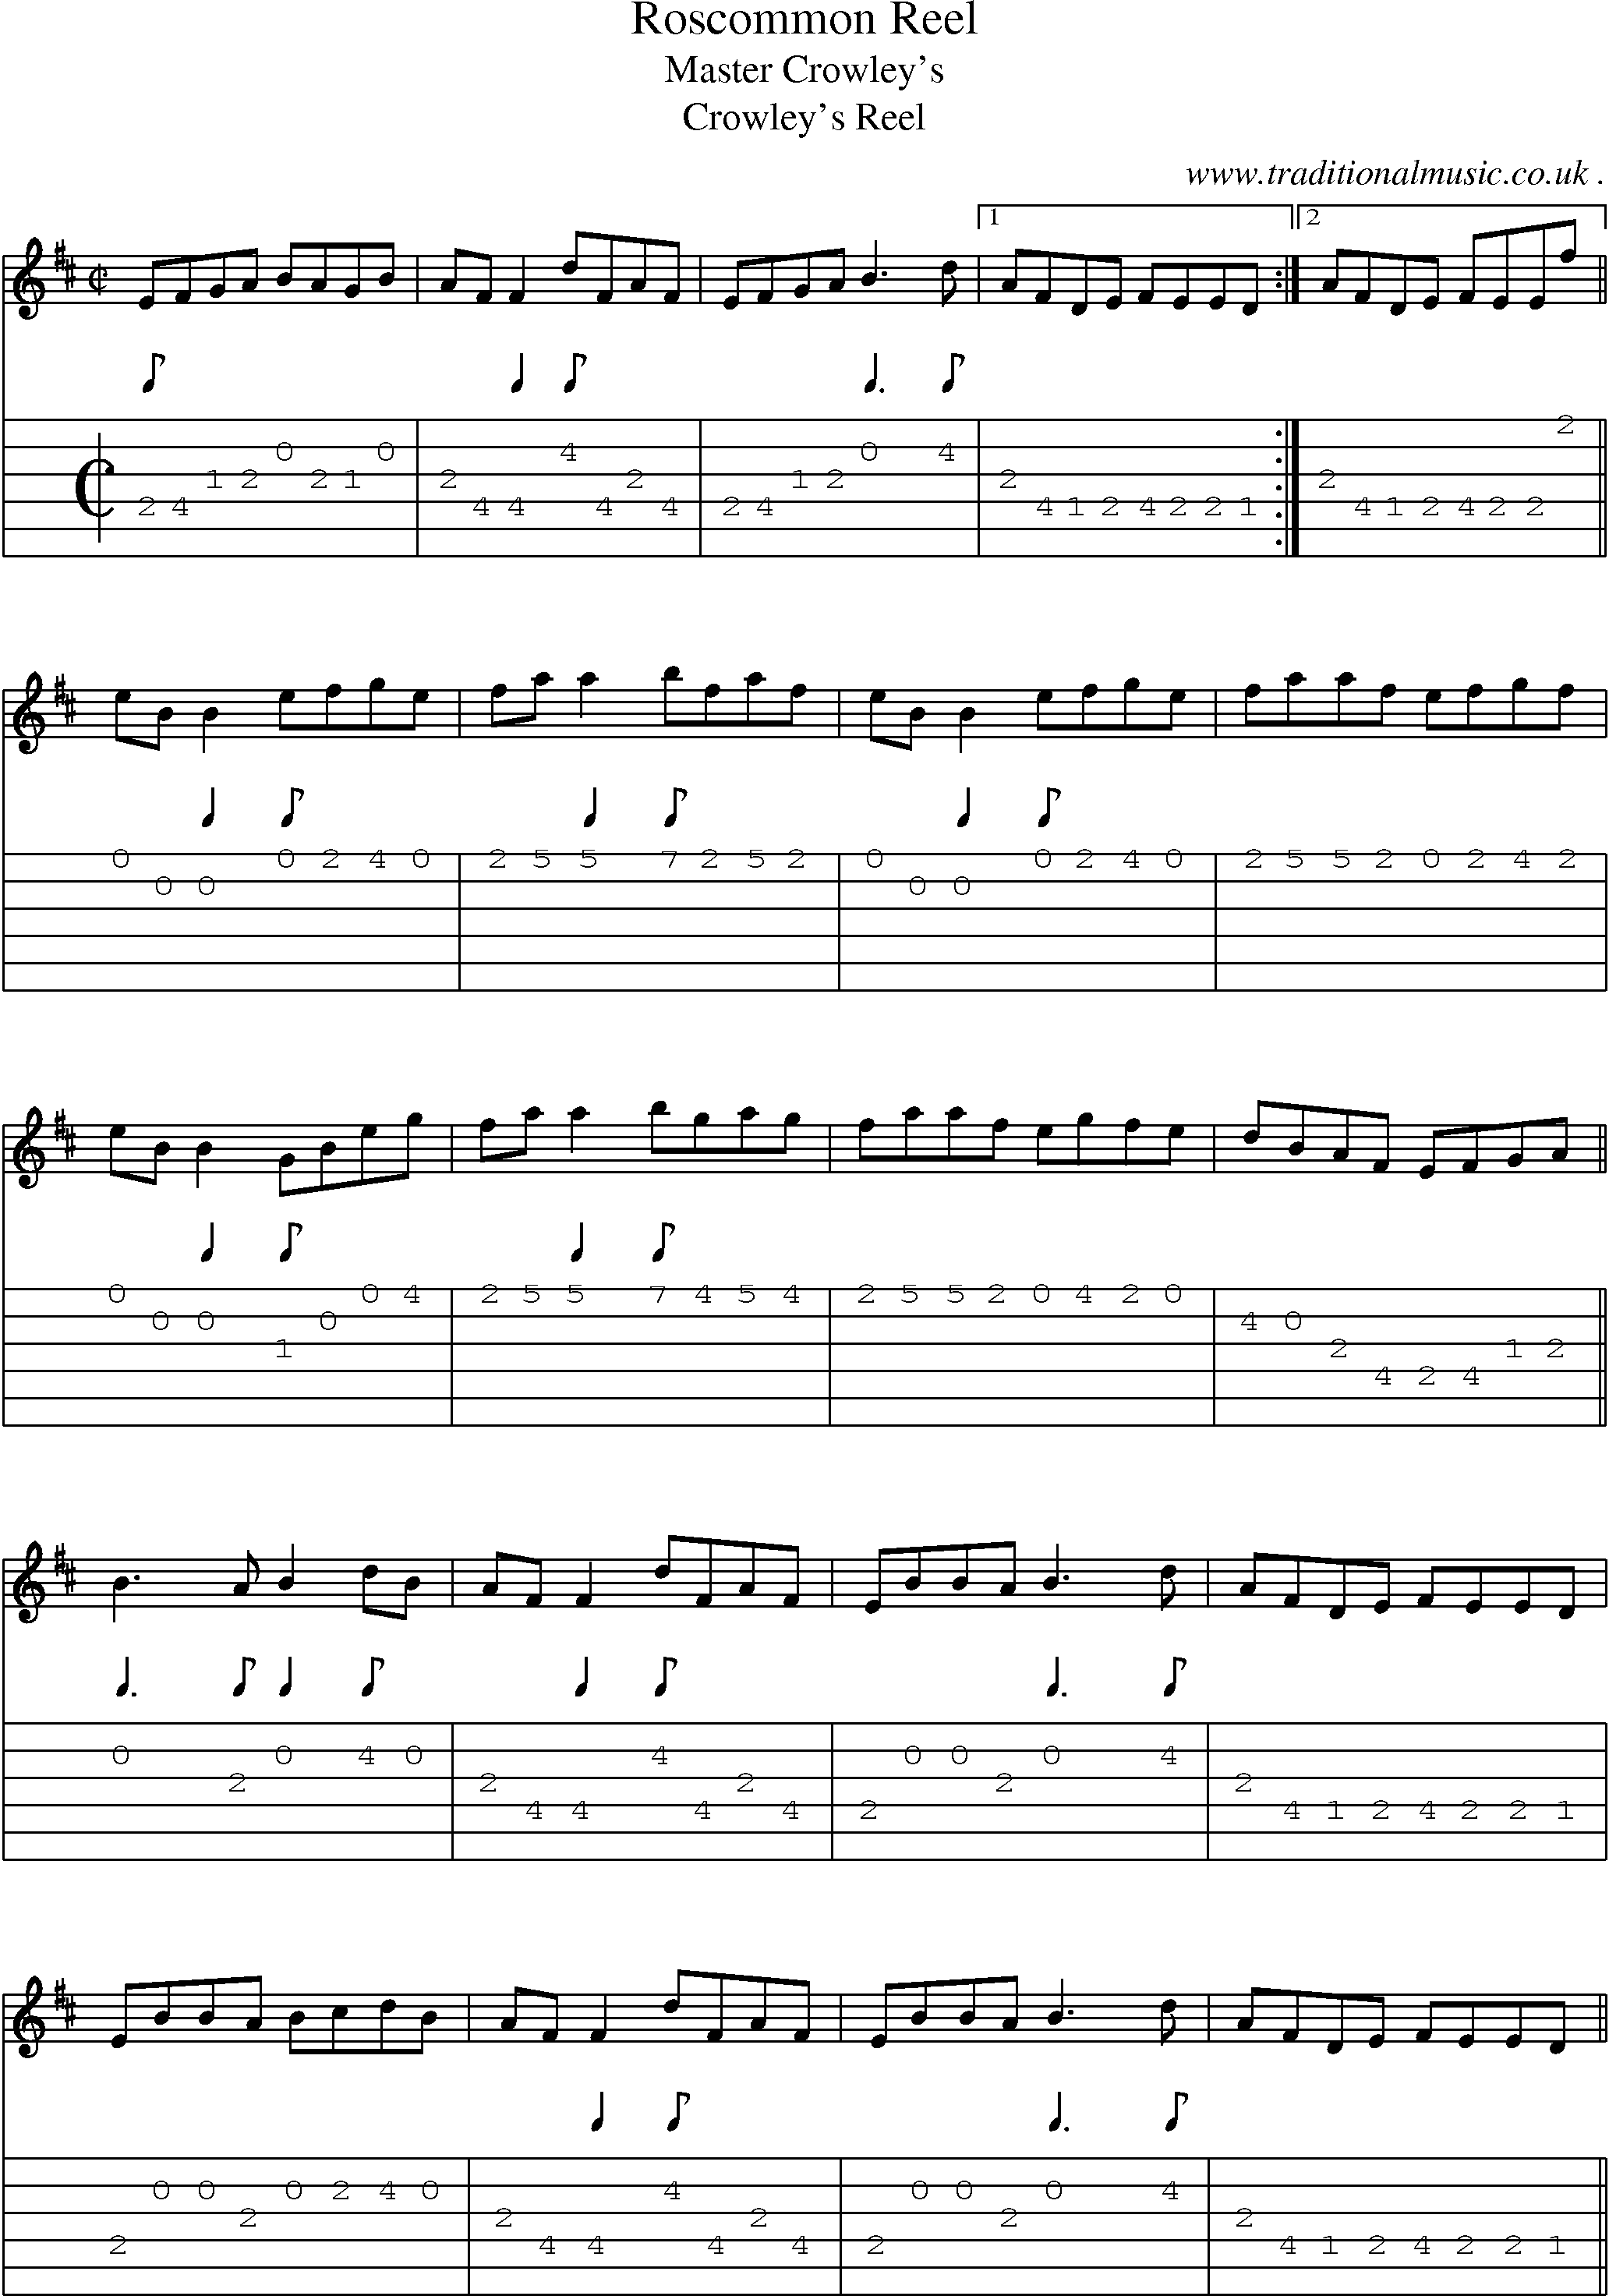 Sheet-Music and Guitar Tabs for Roscommon Reel